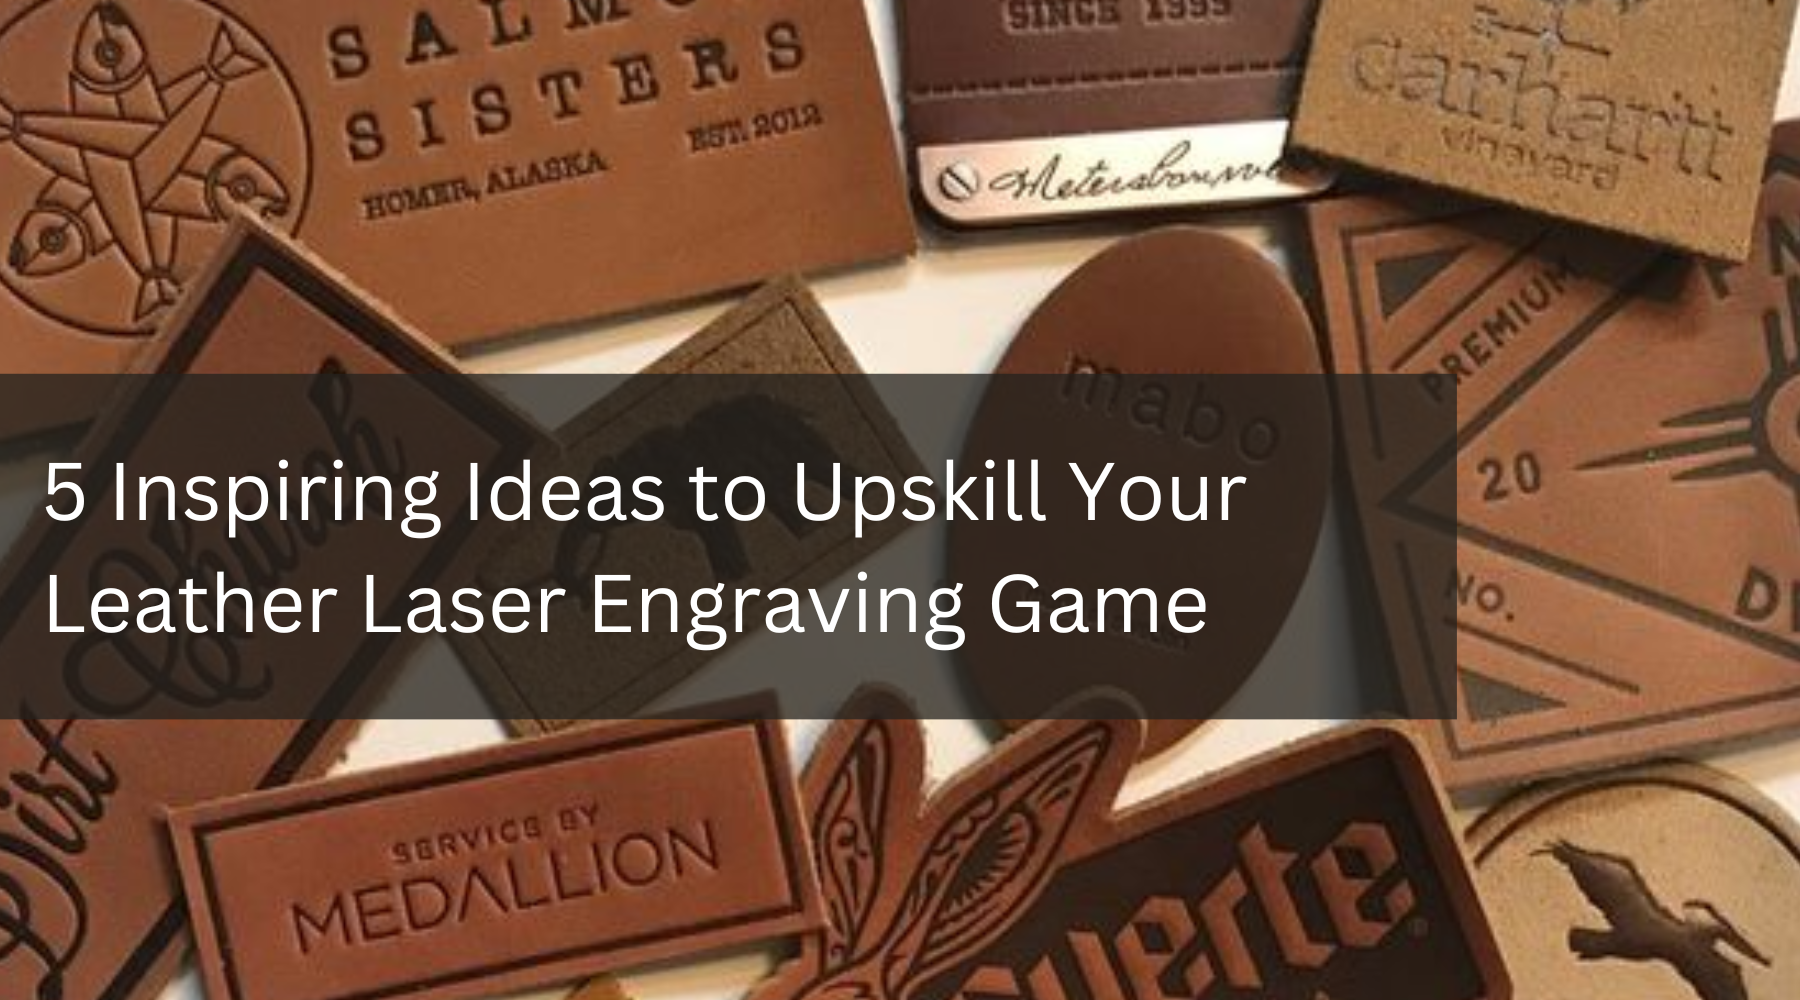 5 Inspiring Ideas to Upskill Your Leather Laser Engraving Game